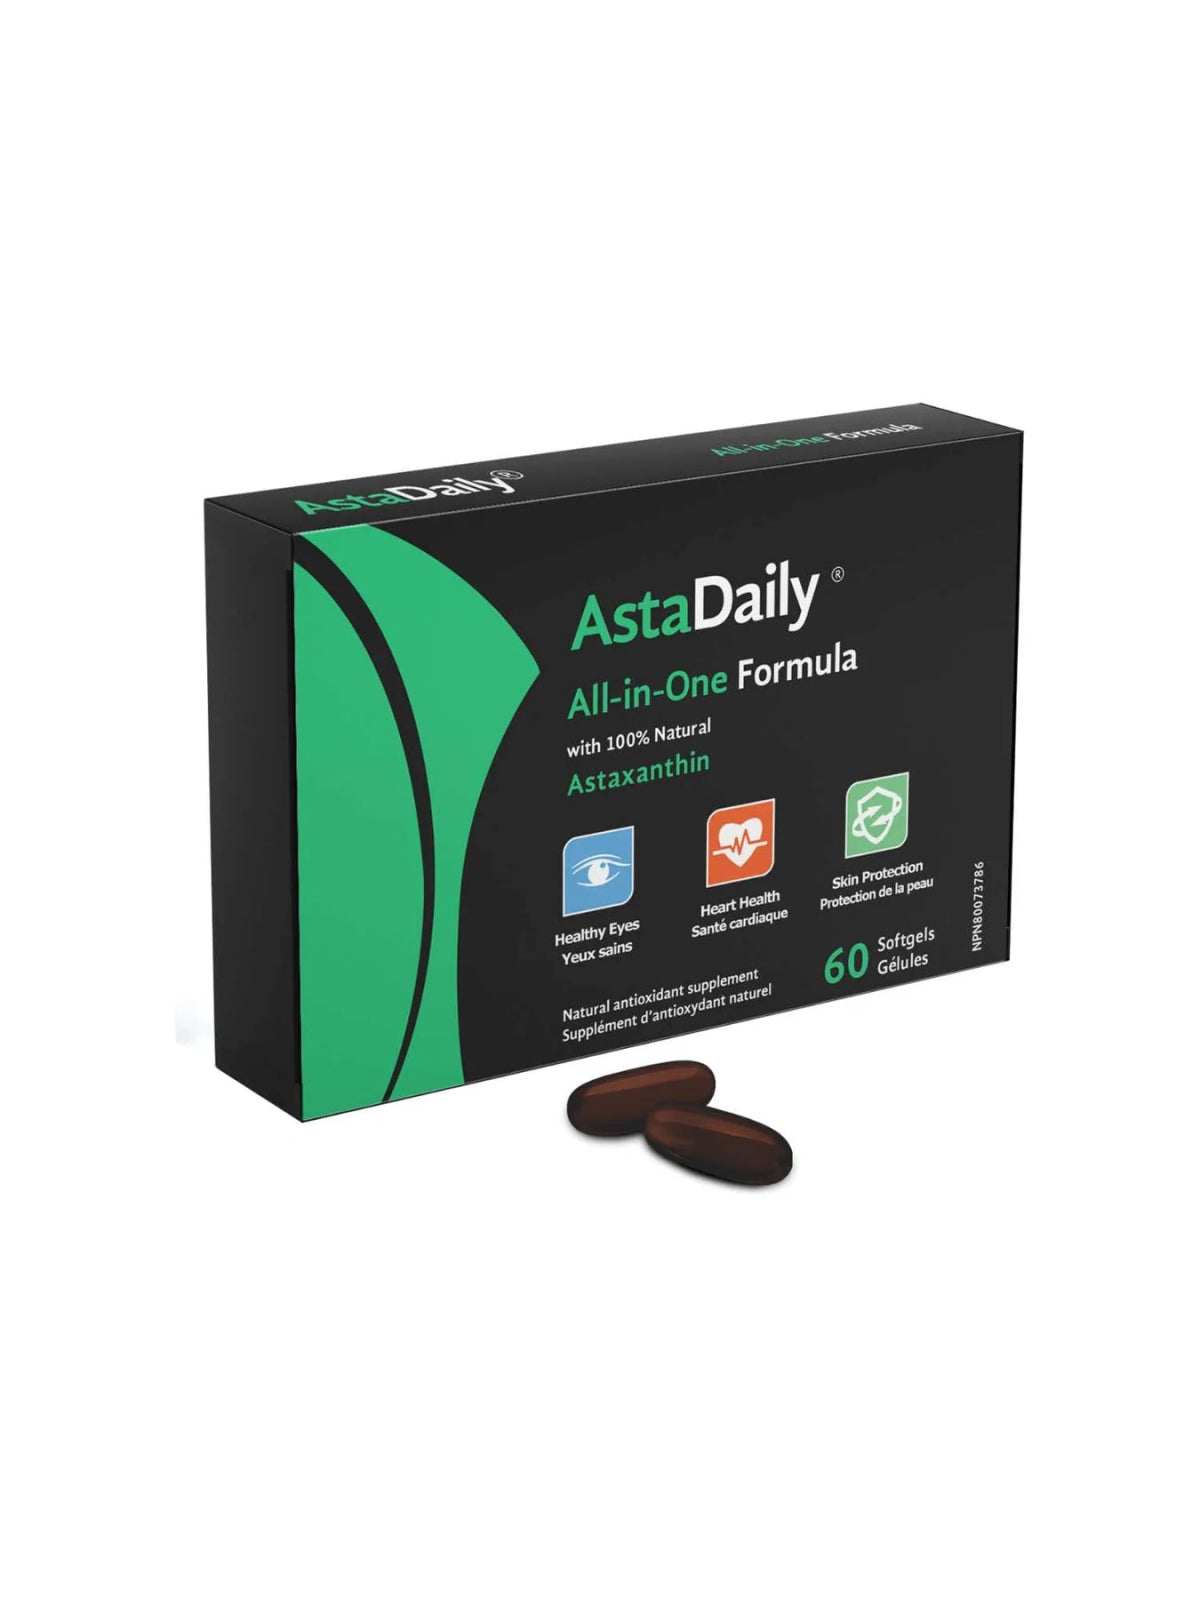 AstaDaily All - In - One Health Supplement - Vision, Heart and Skin (60 softgels)